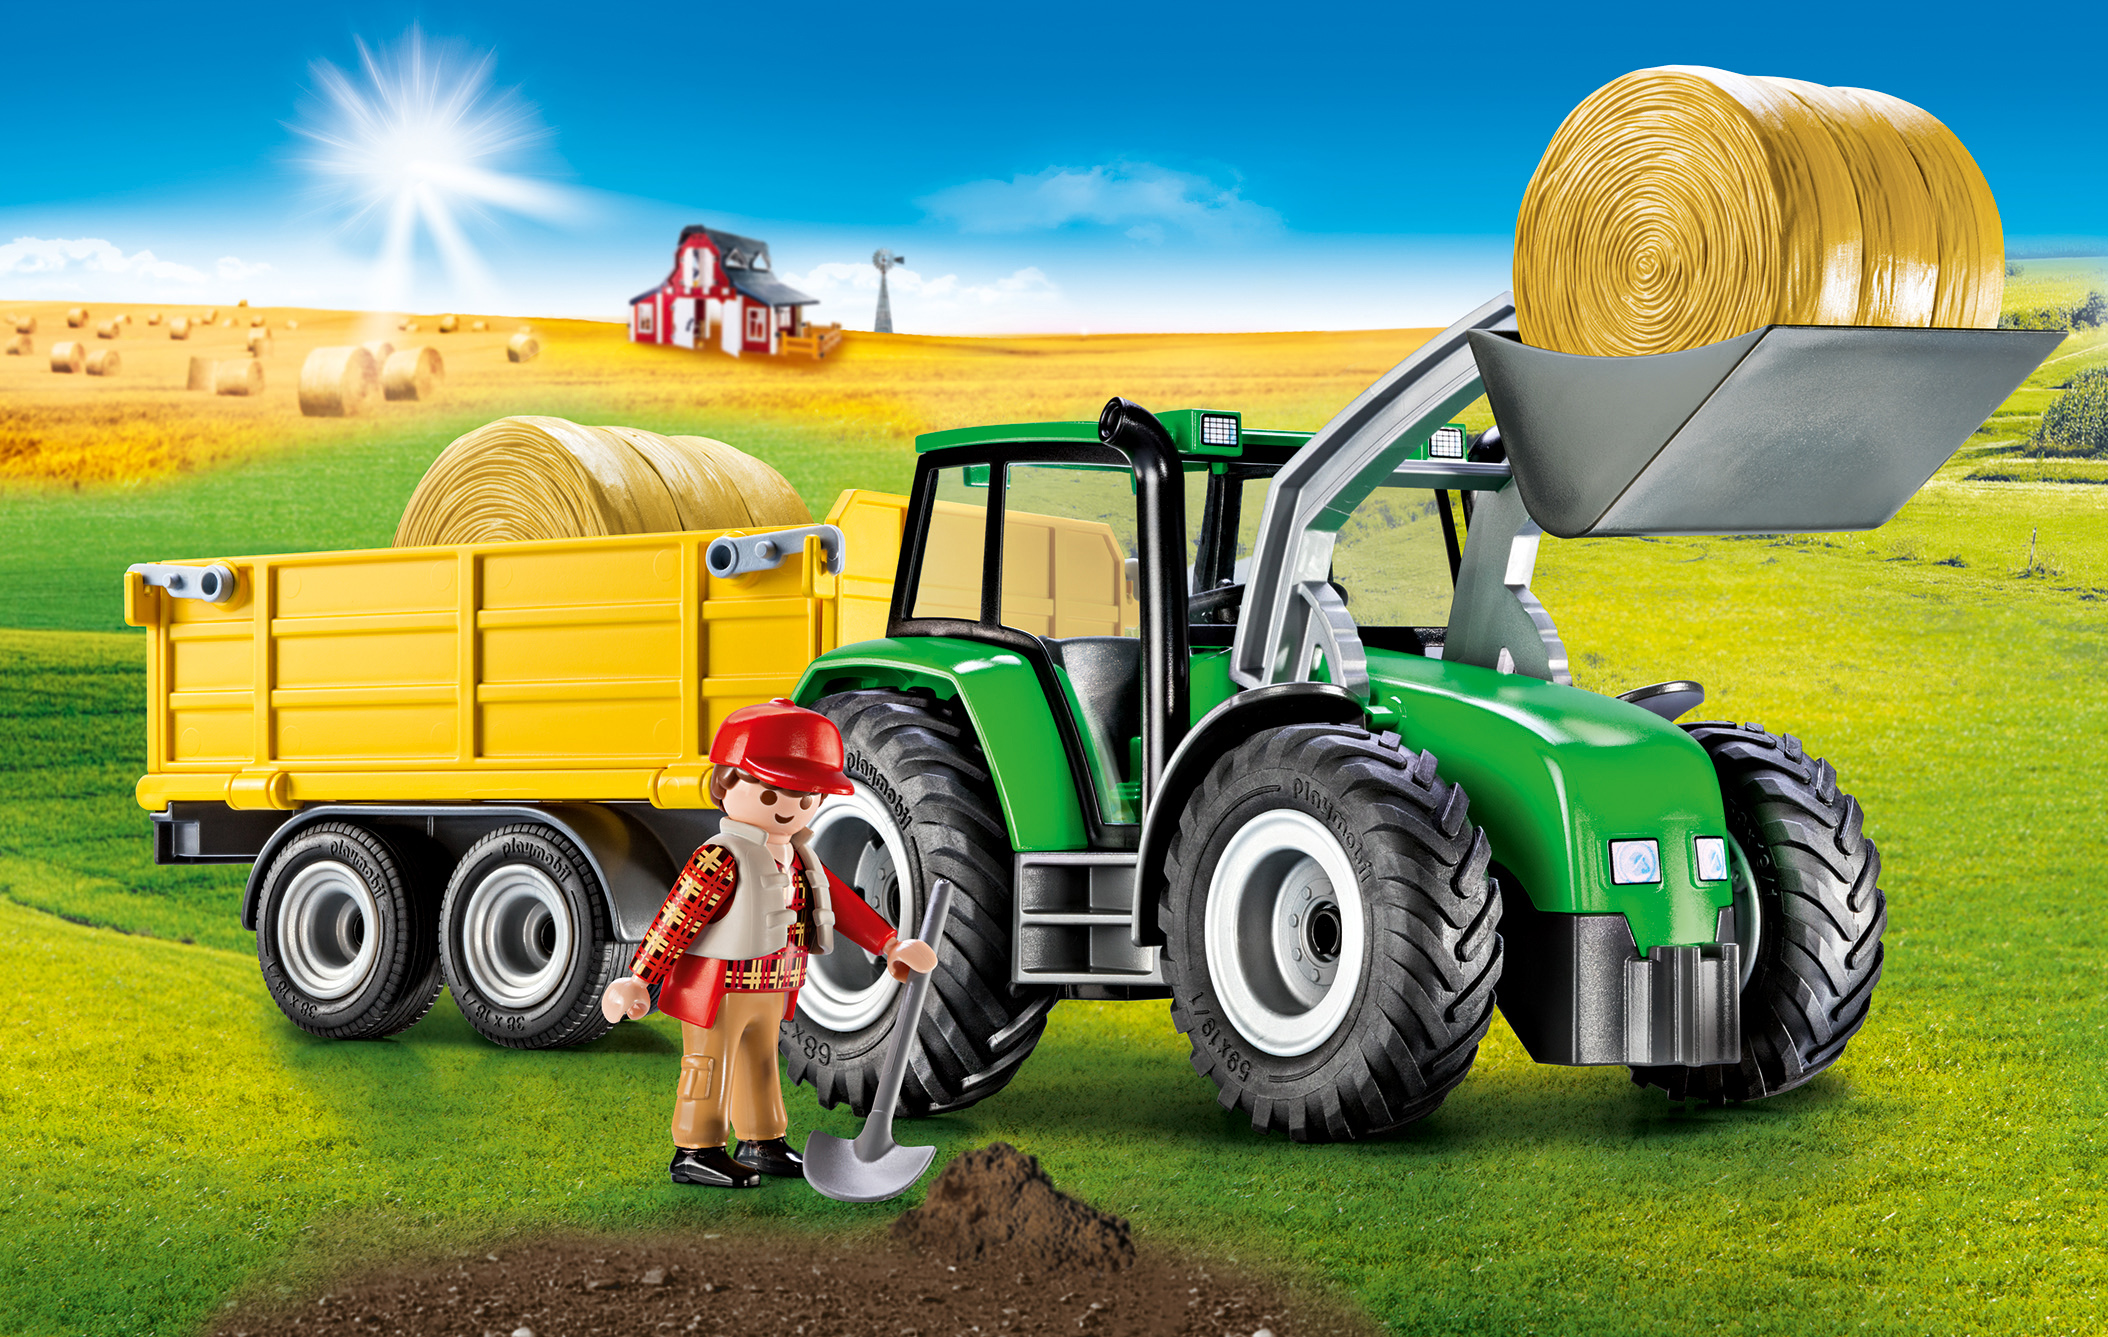 PLAYMOBIL Tractor with Trailer Play Vehicle - image 2 of 6